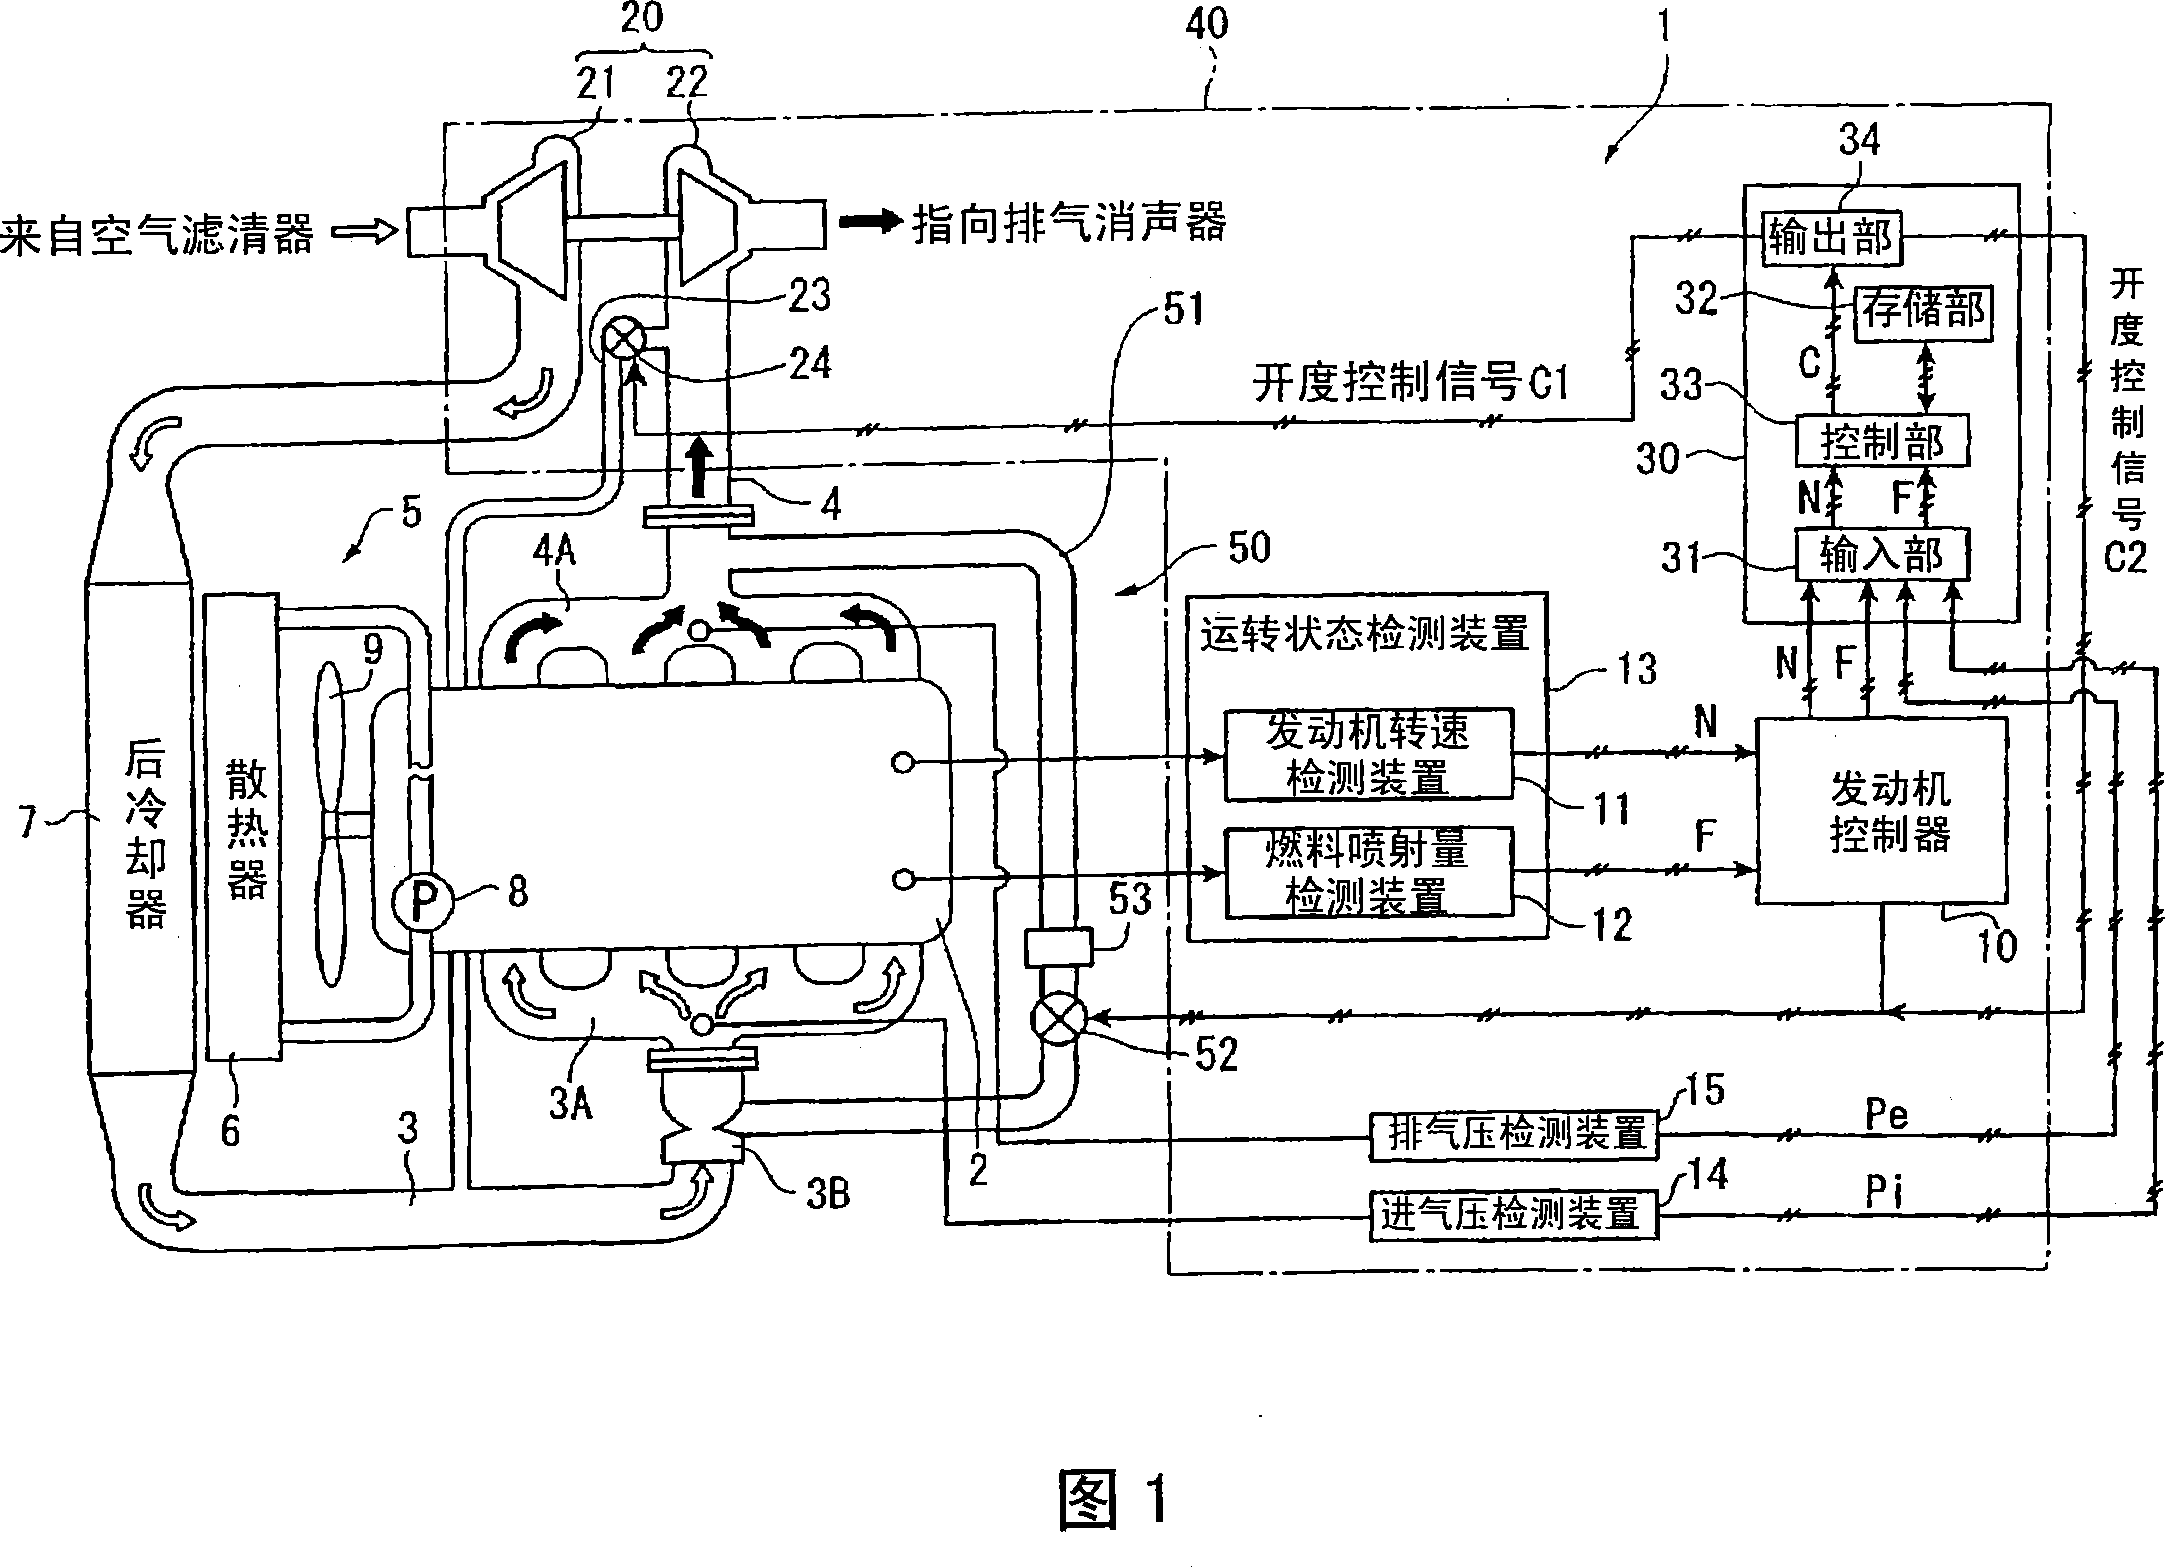 Intake controller of internal combustion engine